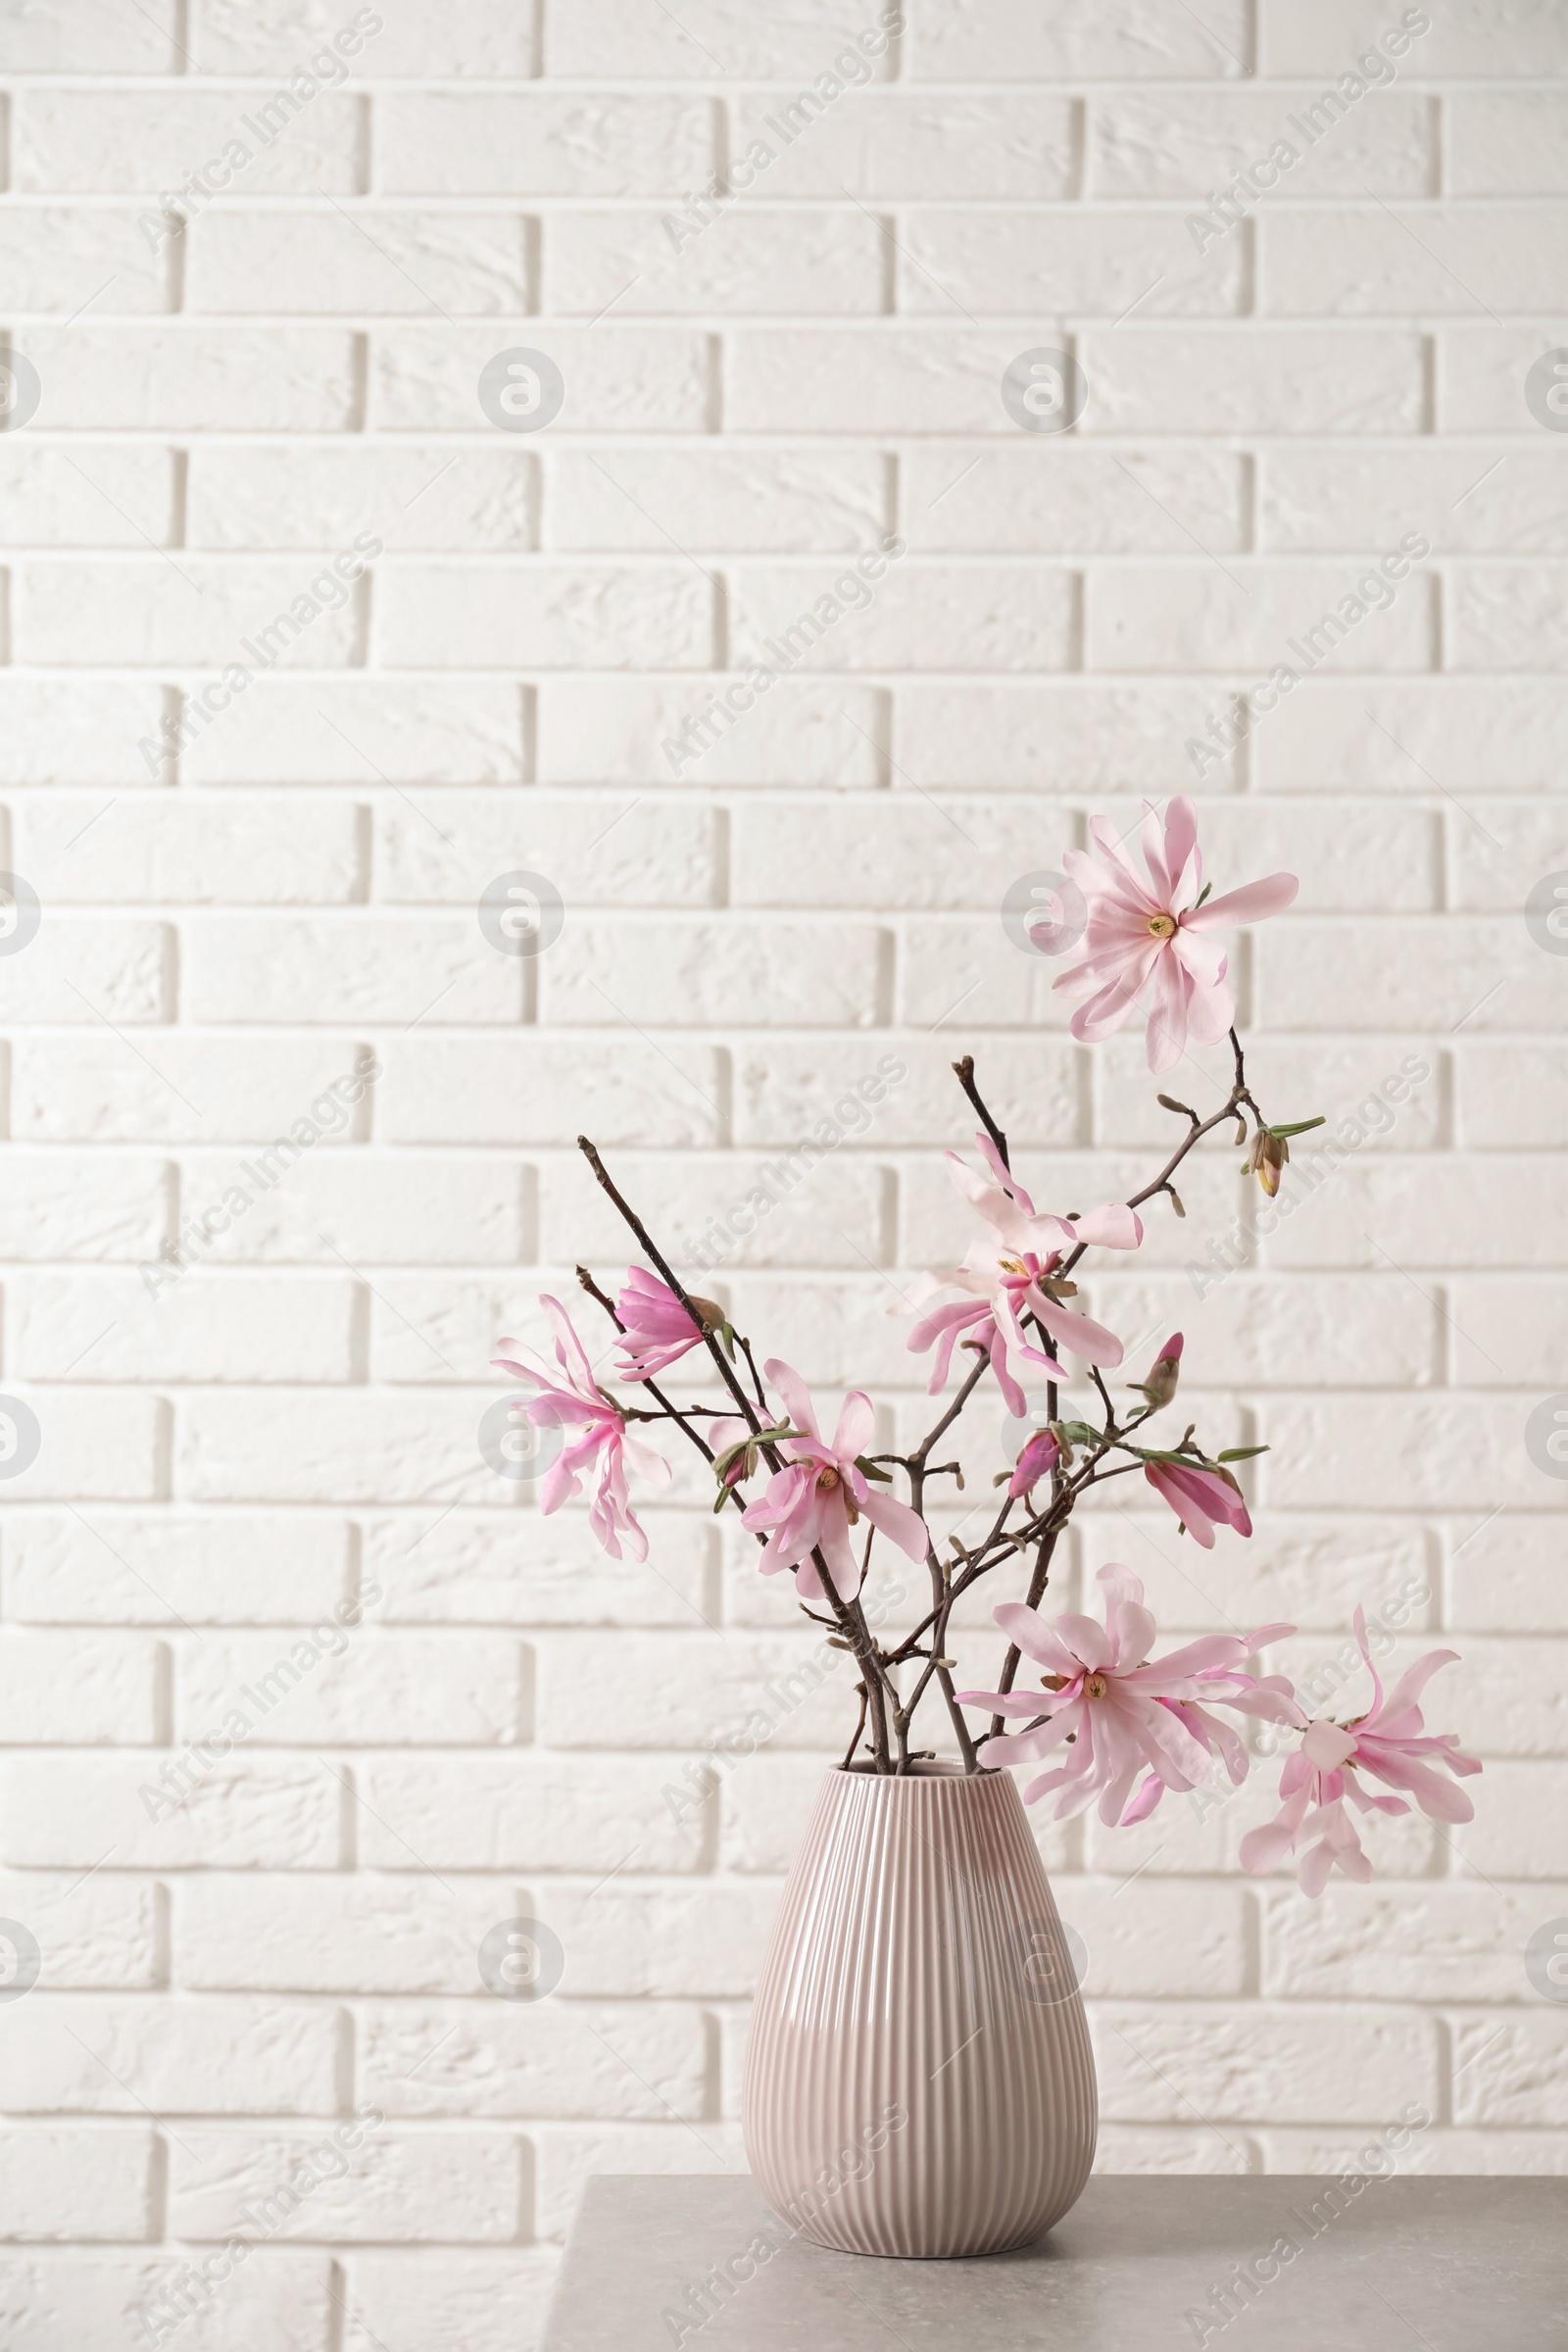 Photo of Magnolia tree branches with beautiful flowers in vase on grey table against white brick wall